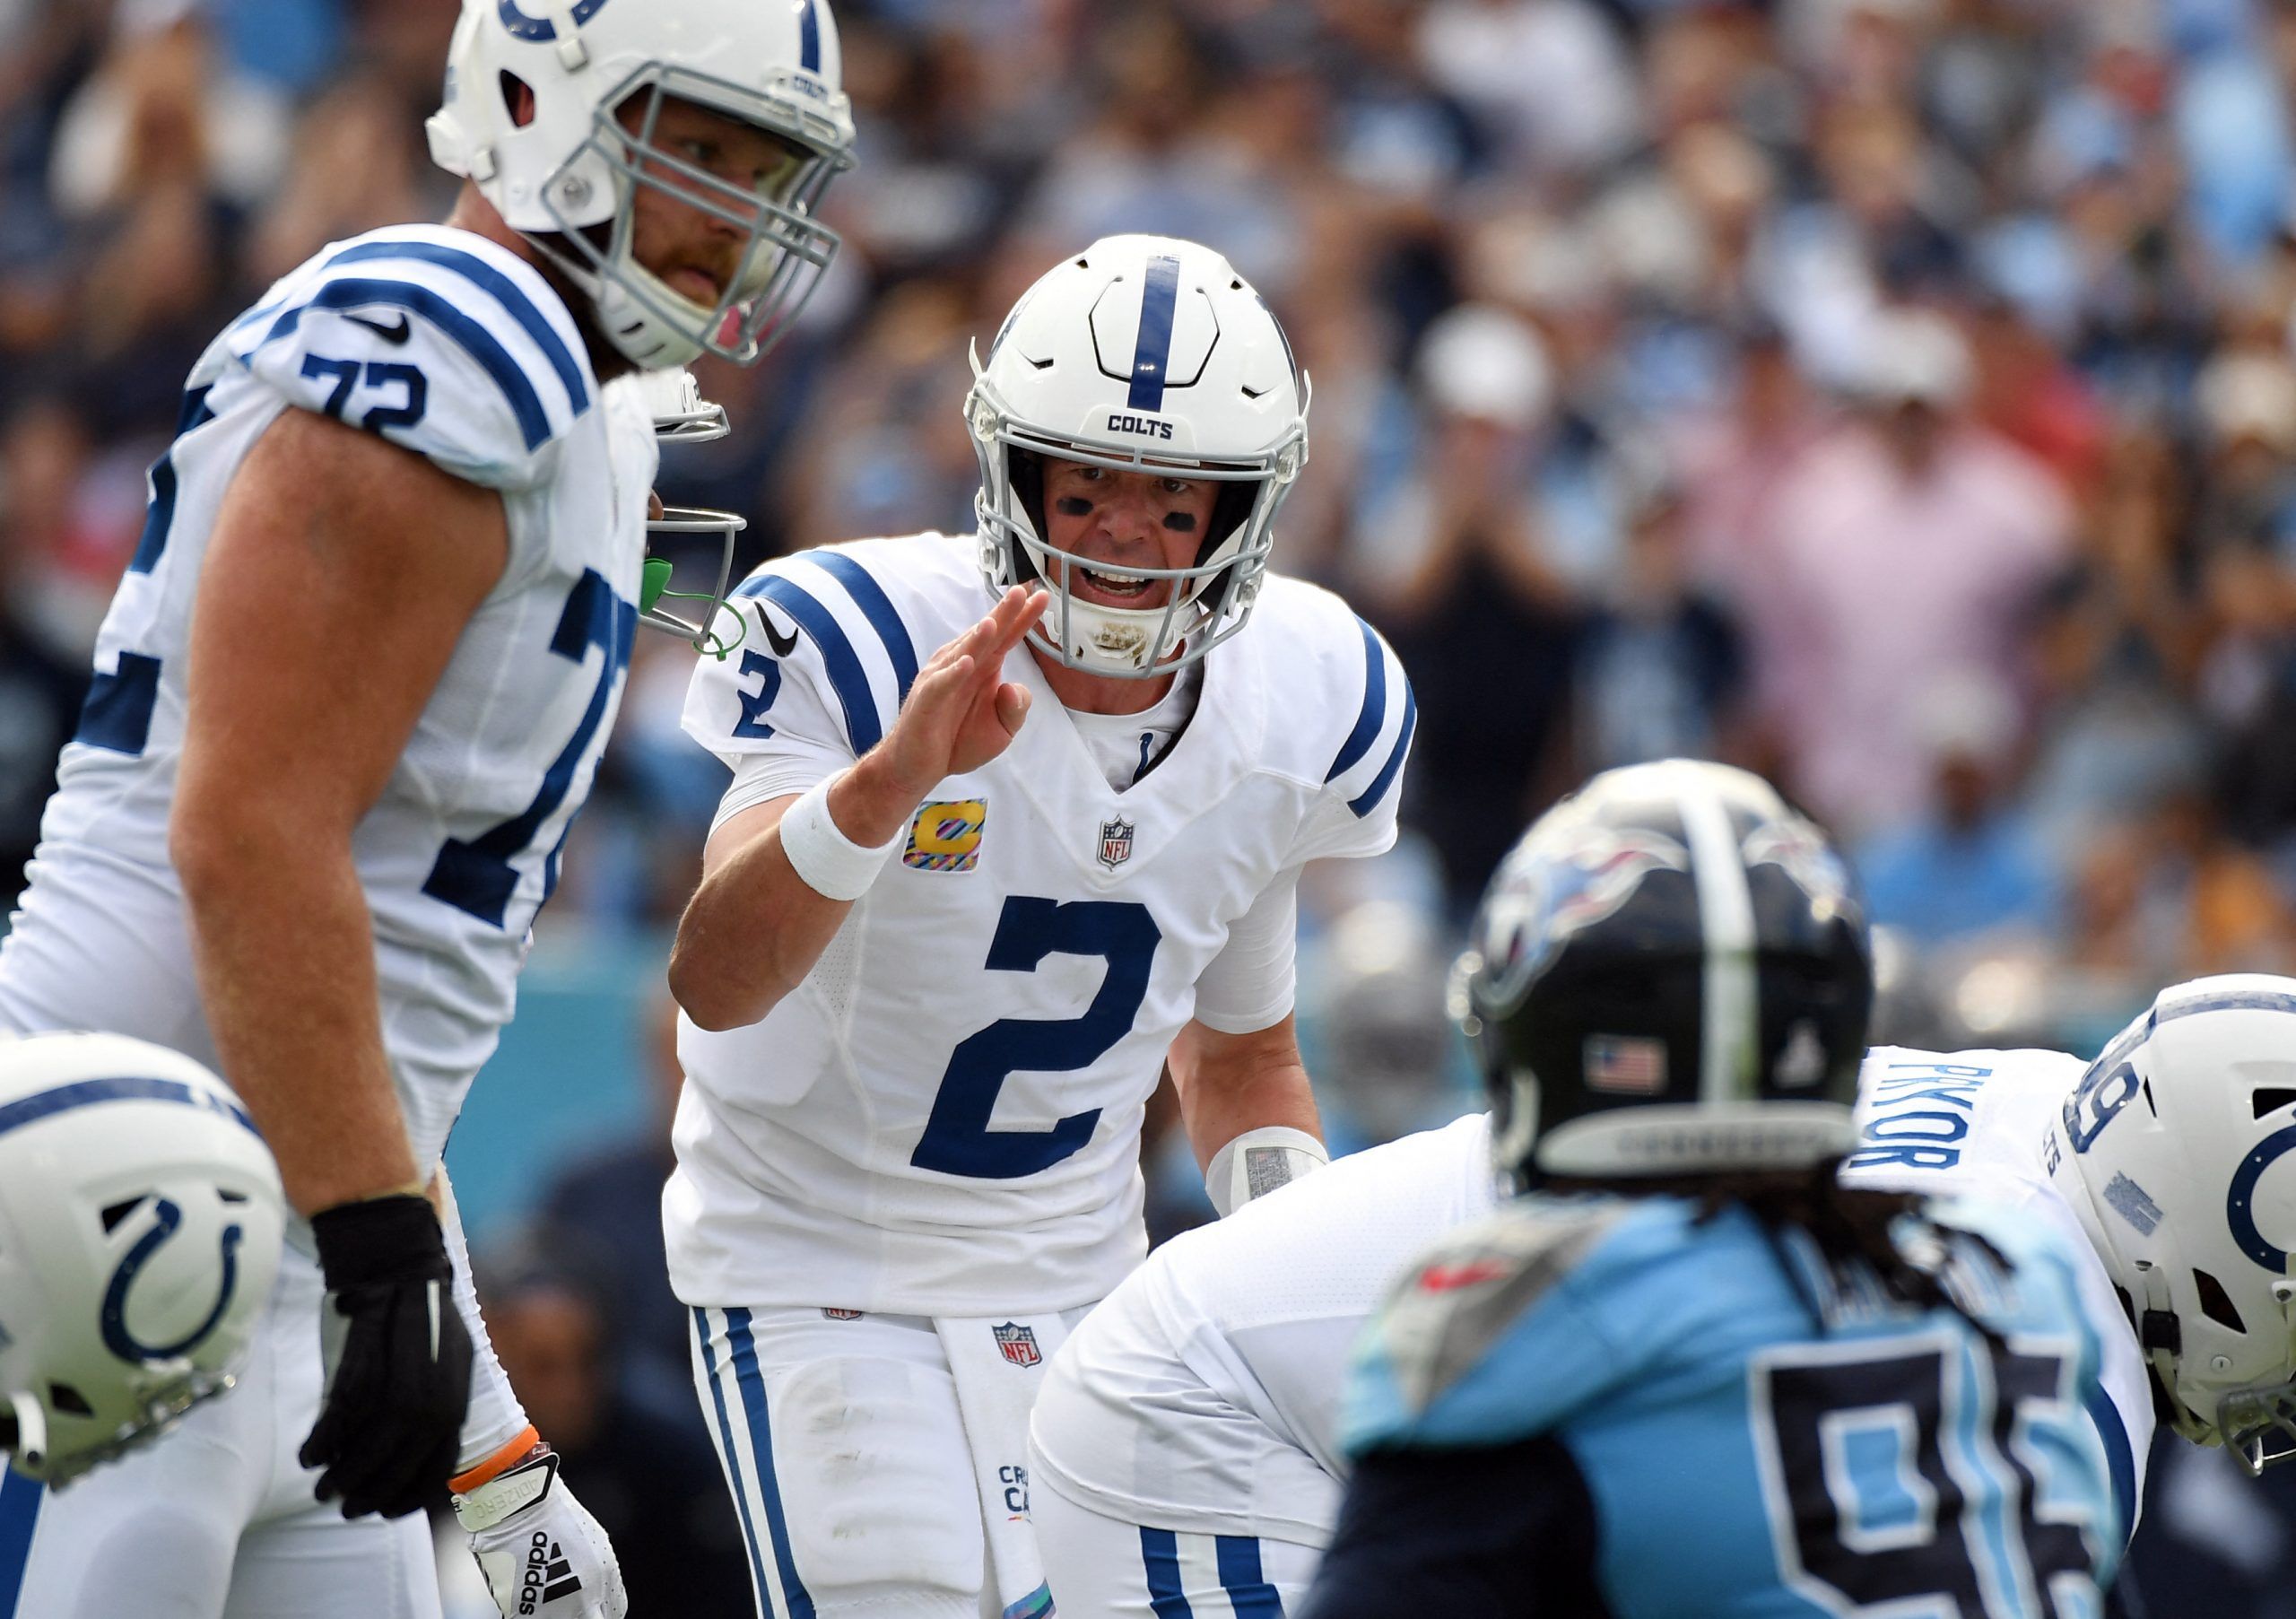 Here's where you can pre-order the first Philip Rivers Colts